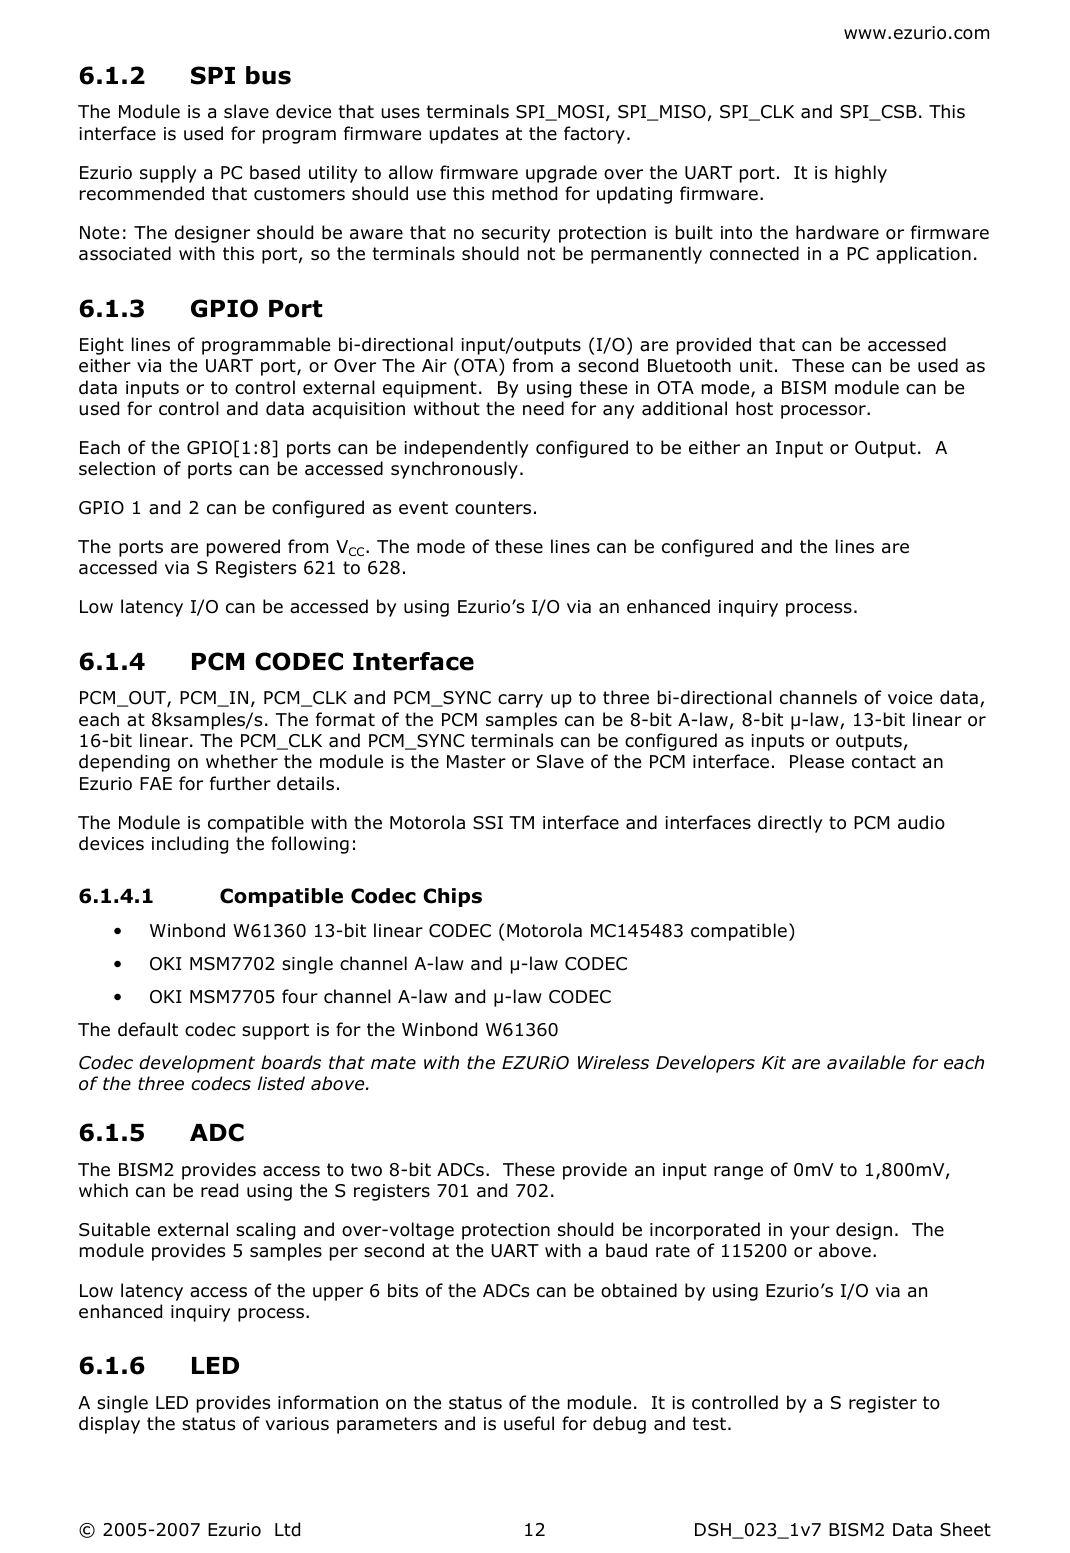 www.ezurio.com © 2005-2007 Ezurio  Ltd  DSH_023_1v7 BISM2 Data Sheet  126.1.2 SPI bus The Module is a slave device that uses terminals SPI_MOSI, SPI_MISO, SPI_CLK and SPI_CSB. This interface is used for program firmware updates at the factory.  Ezurio supply a PC based utility to allow firmware upgrade over the UART port.  It is highly recommended that customers should use this method for updating firmware. Note: The designer should be aware that no security protection is built into the hardware or firmware associated with this port, so the terminals should not be permanently connected in a PC application. 6.1.3 GPIO Port  Eight lines of programmable bi-directional input/outputs (I/O) are provided that can be accessed either via the UART port, or Over The Air (OTA) from a second Bluetooth unit.  These can be used as data inputs or to control external equipment.  By using these in OTA mode, a BISM module can be used for control and data acquisition without the need for any additional host processor. Each of the GPIO[1:8] ports can be independently configured to be either an Input or Output.  A selection of ports can be accessed synchronously. GPIO 1 and 2 can be configured as event counters. The ports are powered from VCC. The mode of these lines can be configured and the lines are accessed via S Registers 621 to 628. Low latency I/O can be accessed by using Ezurio’s I/O via an enhanced inquiry process. 6.1.4 PCM CODEC Interface PCM_OUT, PCM_IN, PCM_CLK and PCM_SYNC carry up to three bi-directional channels of voice data, each at 8ksamples/s. The format of the PCM samples can be 8-bit A-law, 8-bit µ-law, 13-bit linear or 16-bit linear. The PCM_CLK and PCM_SYNC terminals can be configured as inputs or outputs, depending on whether the module is the Master or Slave of the PCM interface.  Please contact an Ezurio FAE for further details. The Module is compatible with the Motorola SSI TM interface and interfaces directly to PCM audio devices including the following:  6.1.4.1 Compatible Codec Chips • Winbond W61360 13-bit linear CODEC (Motorola MC145483 compatible) • OKI MSM7702 single channel A-law and µ-law CODEC • OKI MSM7705 four channel A-law and µ-law CODEC The default codec support is for the Winbond W61360 Codec development boards that mate with the EZURiO Wireless Developers Kit are available for each of the three codecs listed above. 6.1.5 ADC The BISM2 provides access to two 8-bit ADCs.  These provide an input range of 0mV to 1,800mV, which can be read using the S registers 701 and 702. Suitable external scaling and over-voltage protection should be incorporated in your design.  The module provides 5 samples per second at the UART with a baud rate of 115200 or above.  Low latency access of the upper 6 bits of the ADCs can be obtained by using Ezurio’s I/O via an enhanced inquiry process. 6.1.6 LED   A single LED provides information on the status of the module.  It is controlled by a S register to display the status of various parameters and is useful for debug and test. 